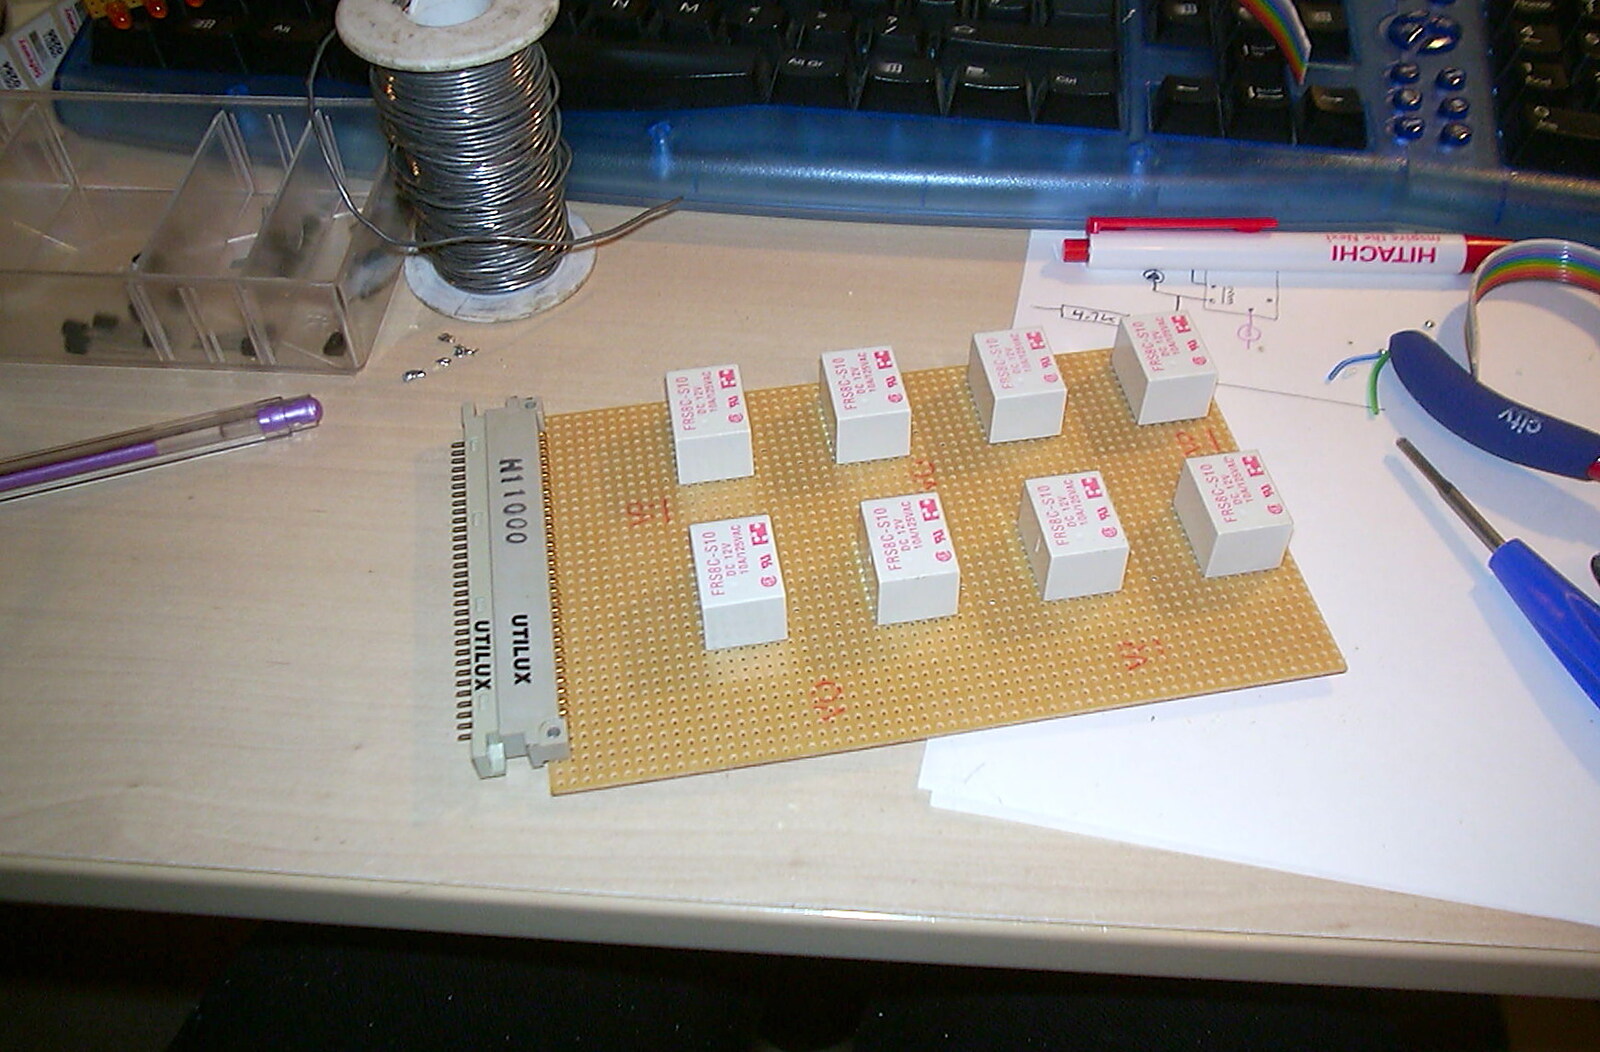 A set of relays on Veroboard from The BBs and a Visit from Trotsky, Bressingham, Norfolk - 13th December 2003